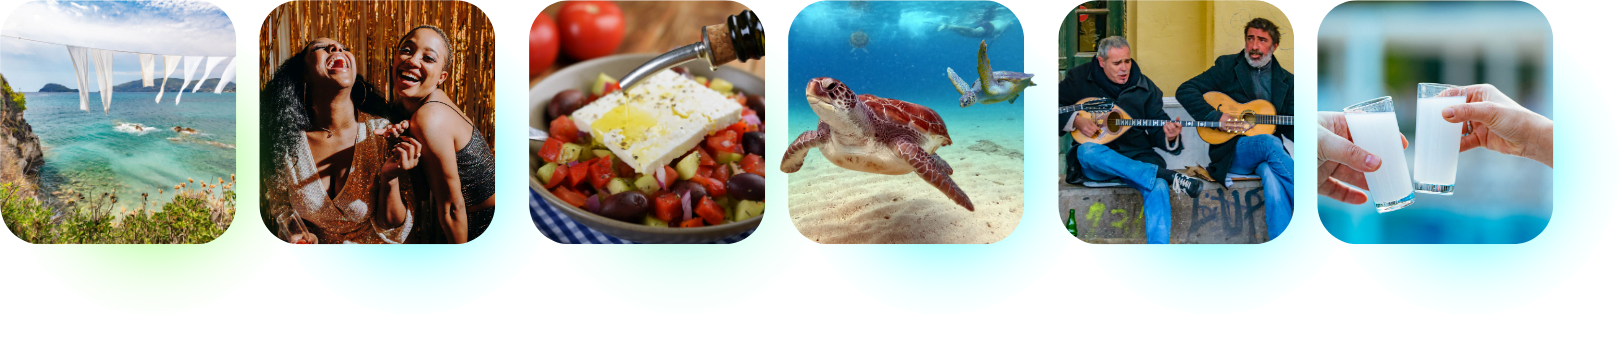 experience tiles featuring cameo island, friends having fun, greek salad, a caretta - caretta turtle, musicians playing traditional organs and ouzo